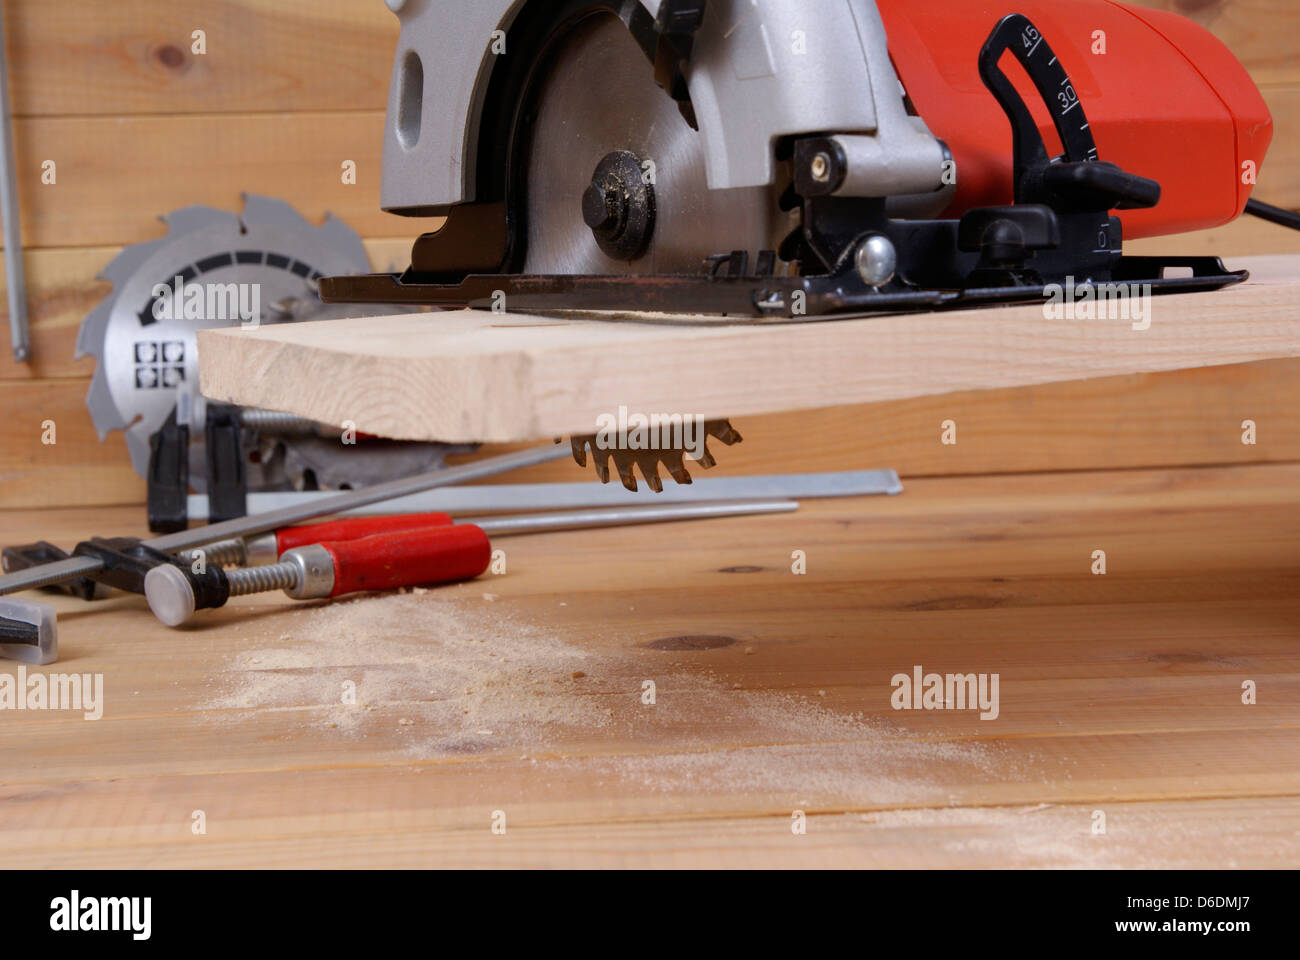 circular saw and accessories on the board Stock Photo